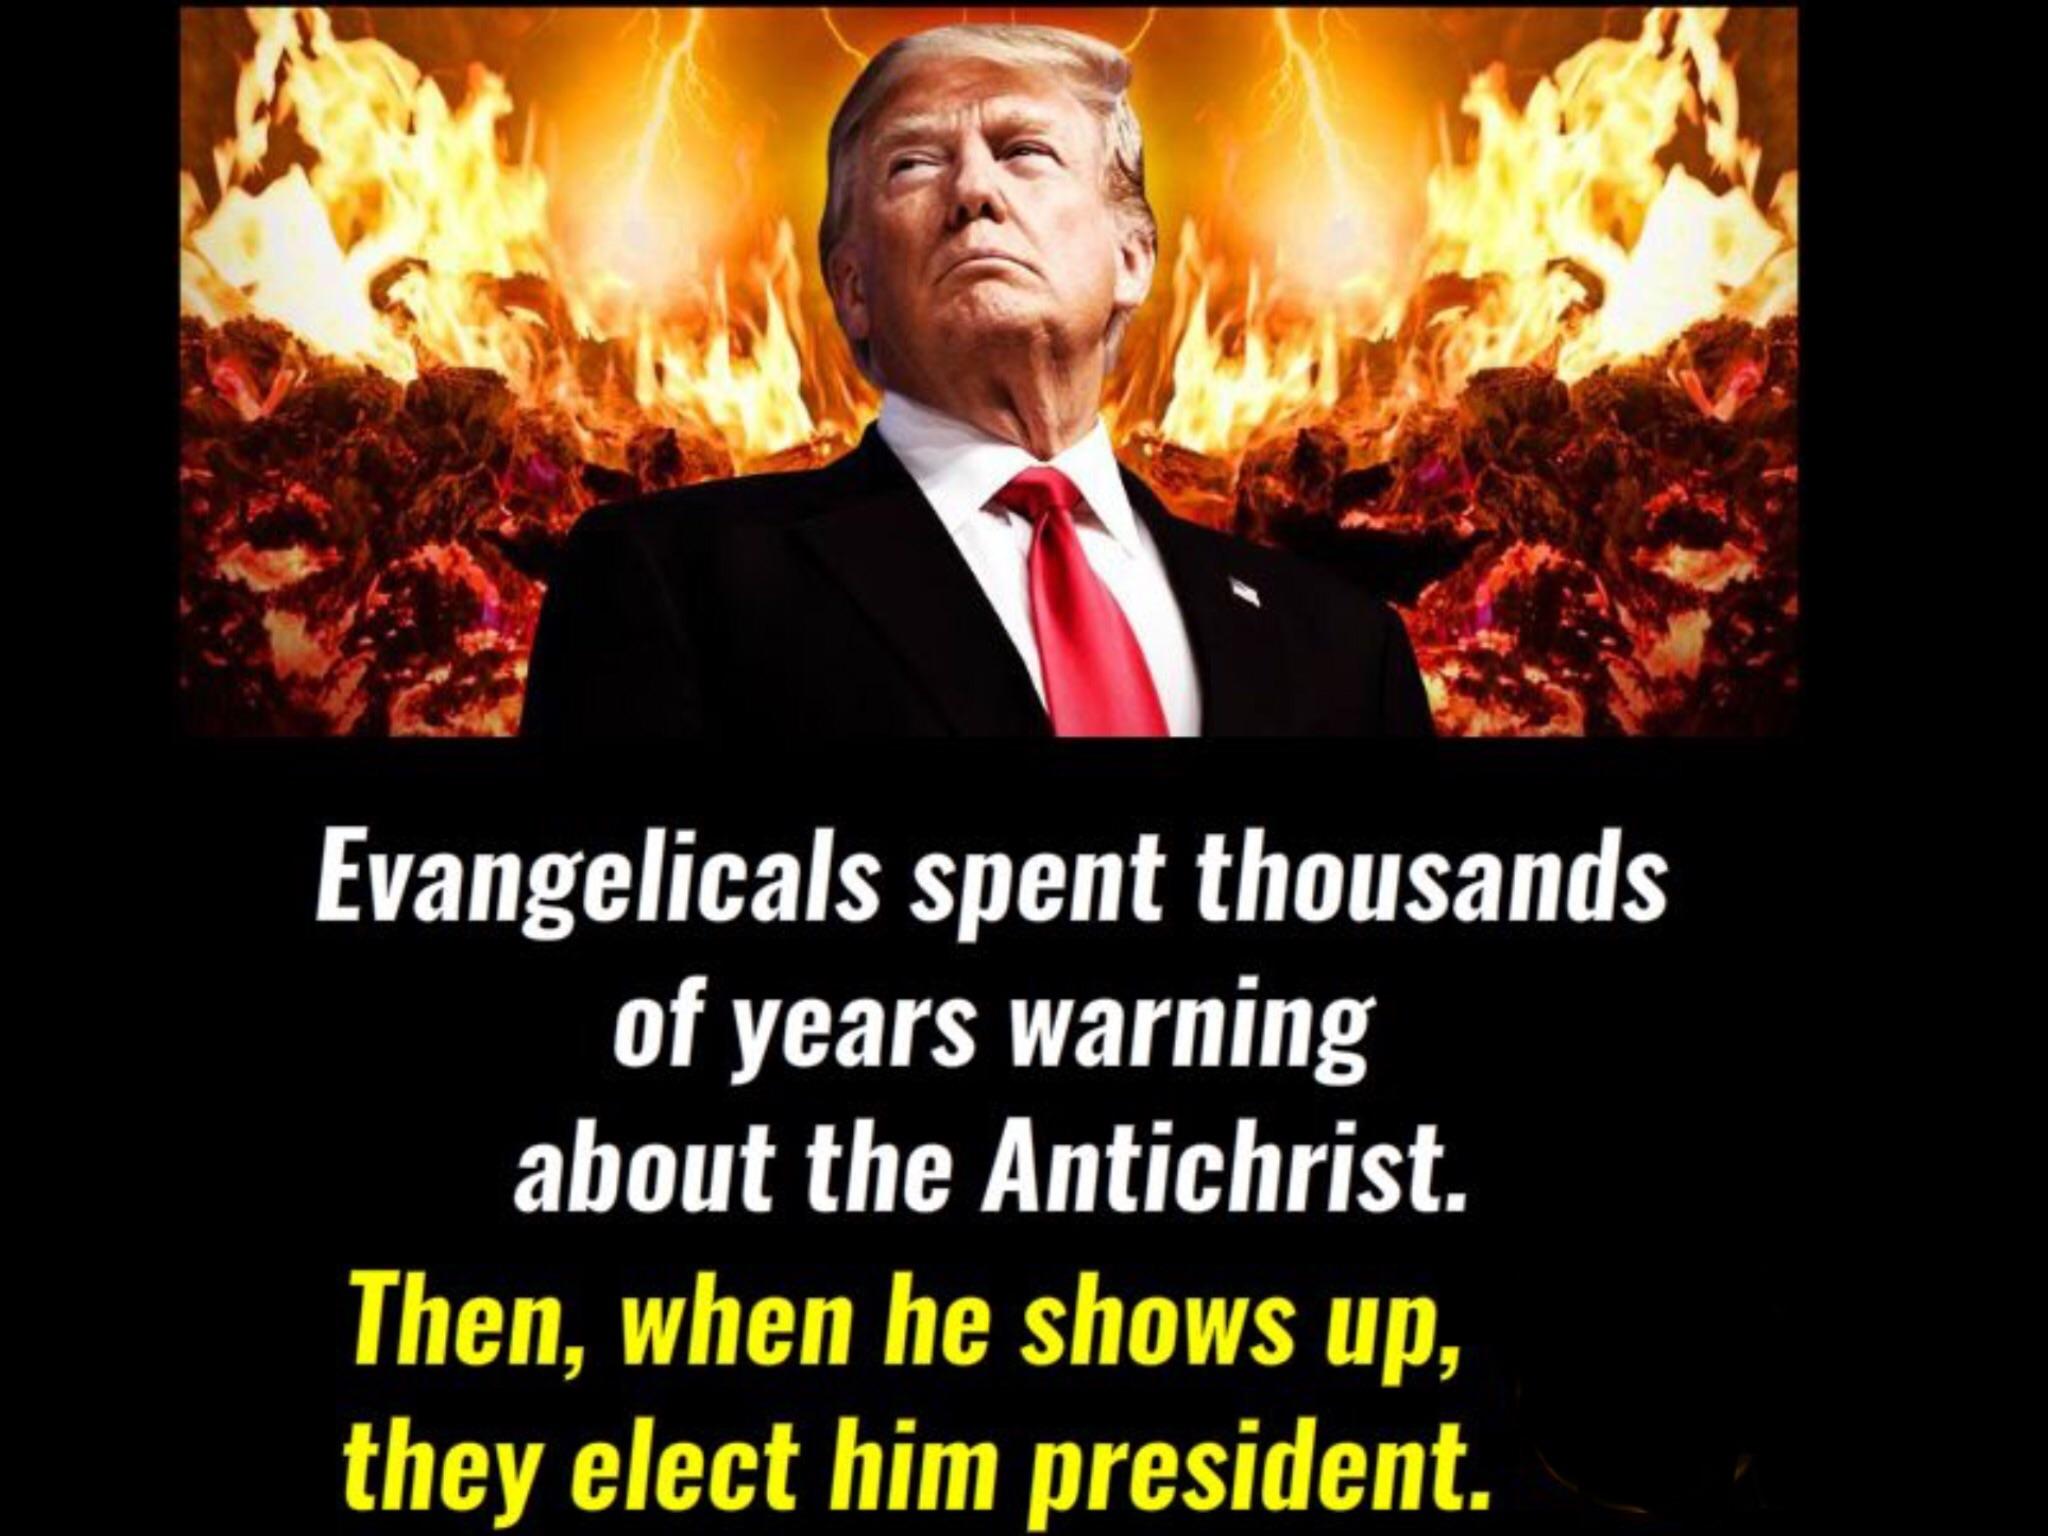 trump as satan - Evangelicals spent thousands of years warning about the Antichrist. Then, when he shows up, they elect him president.